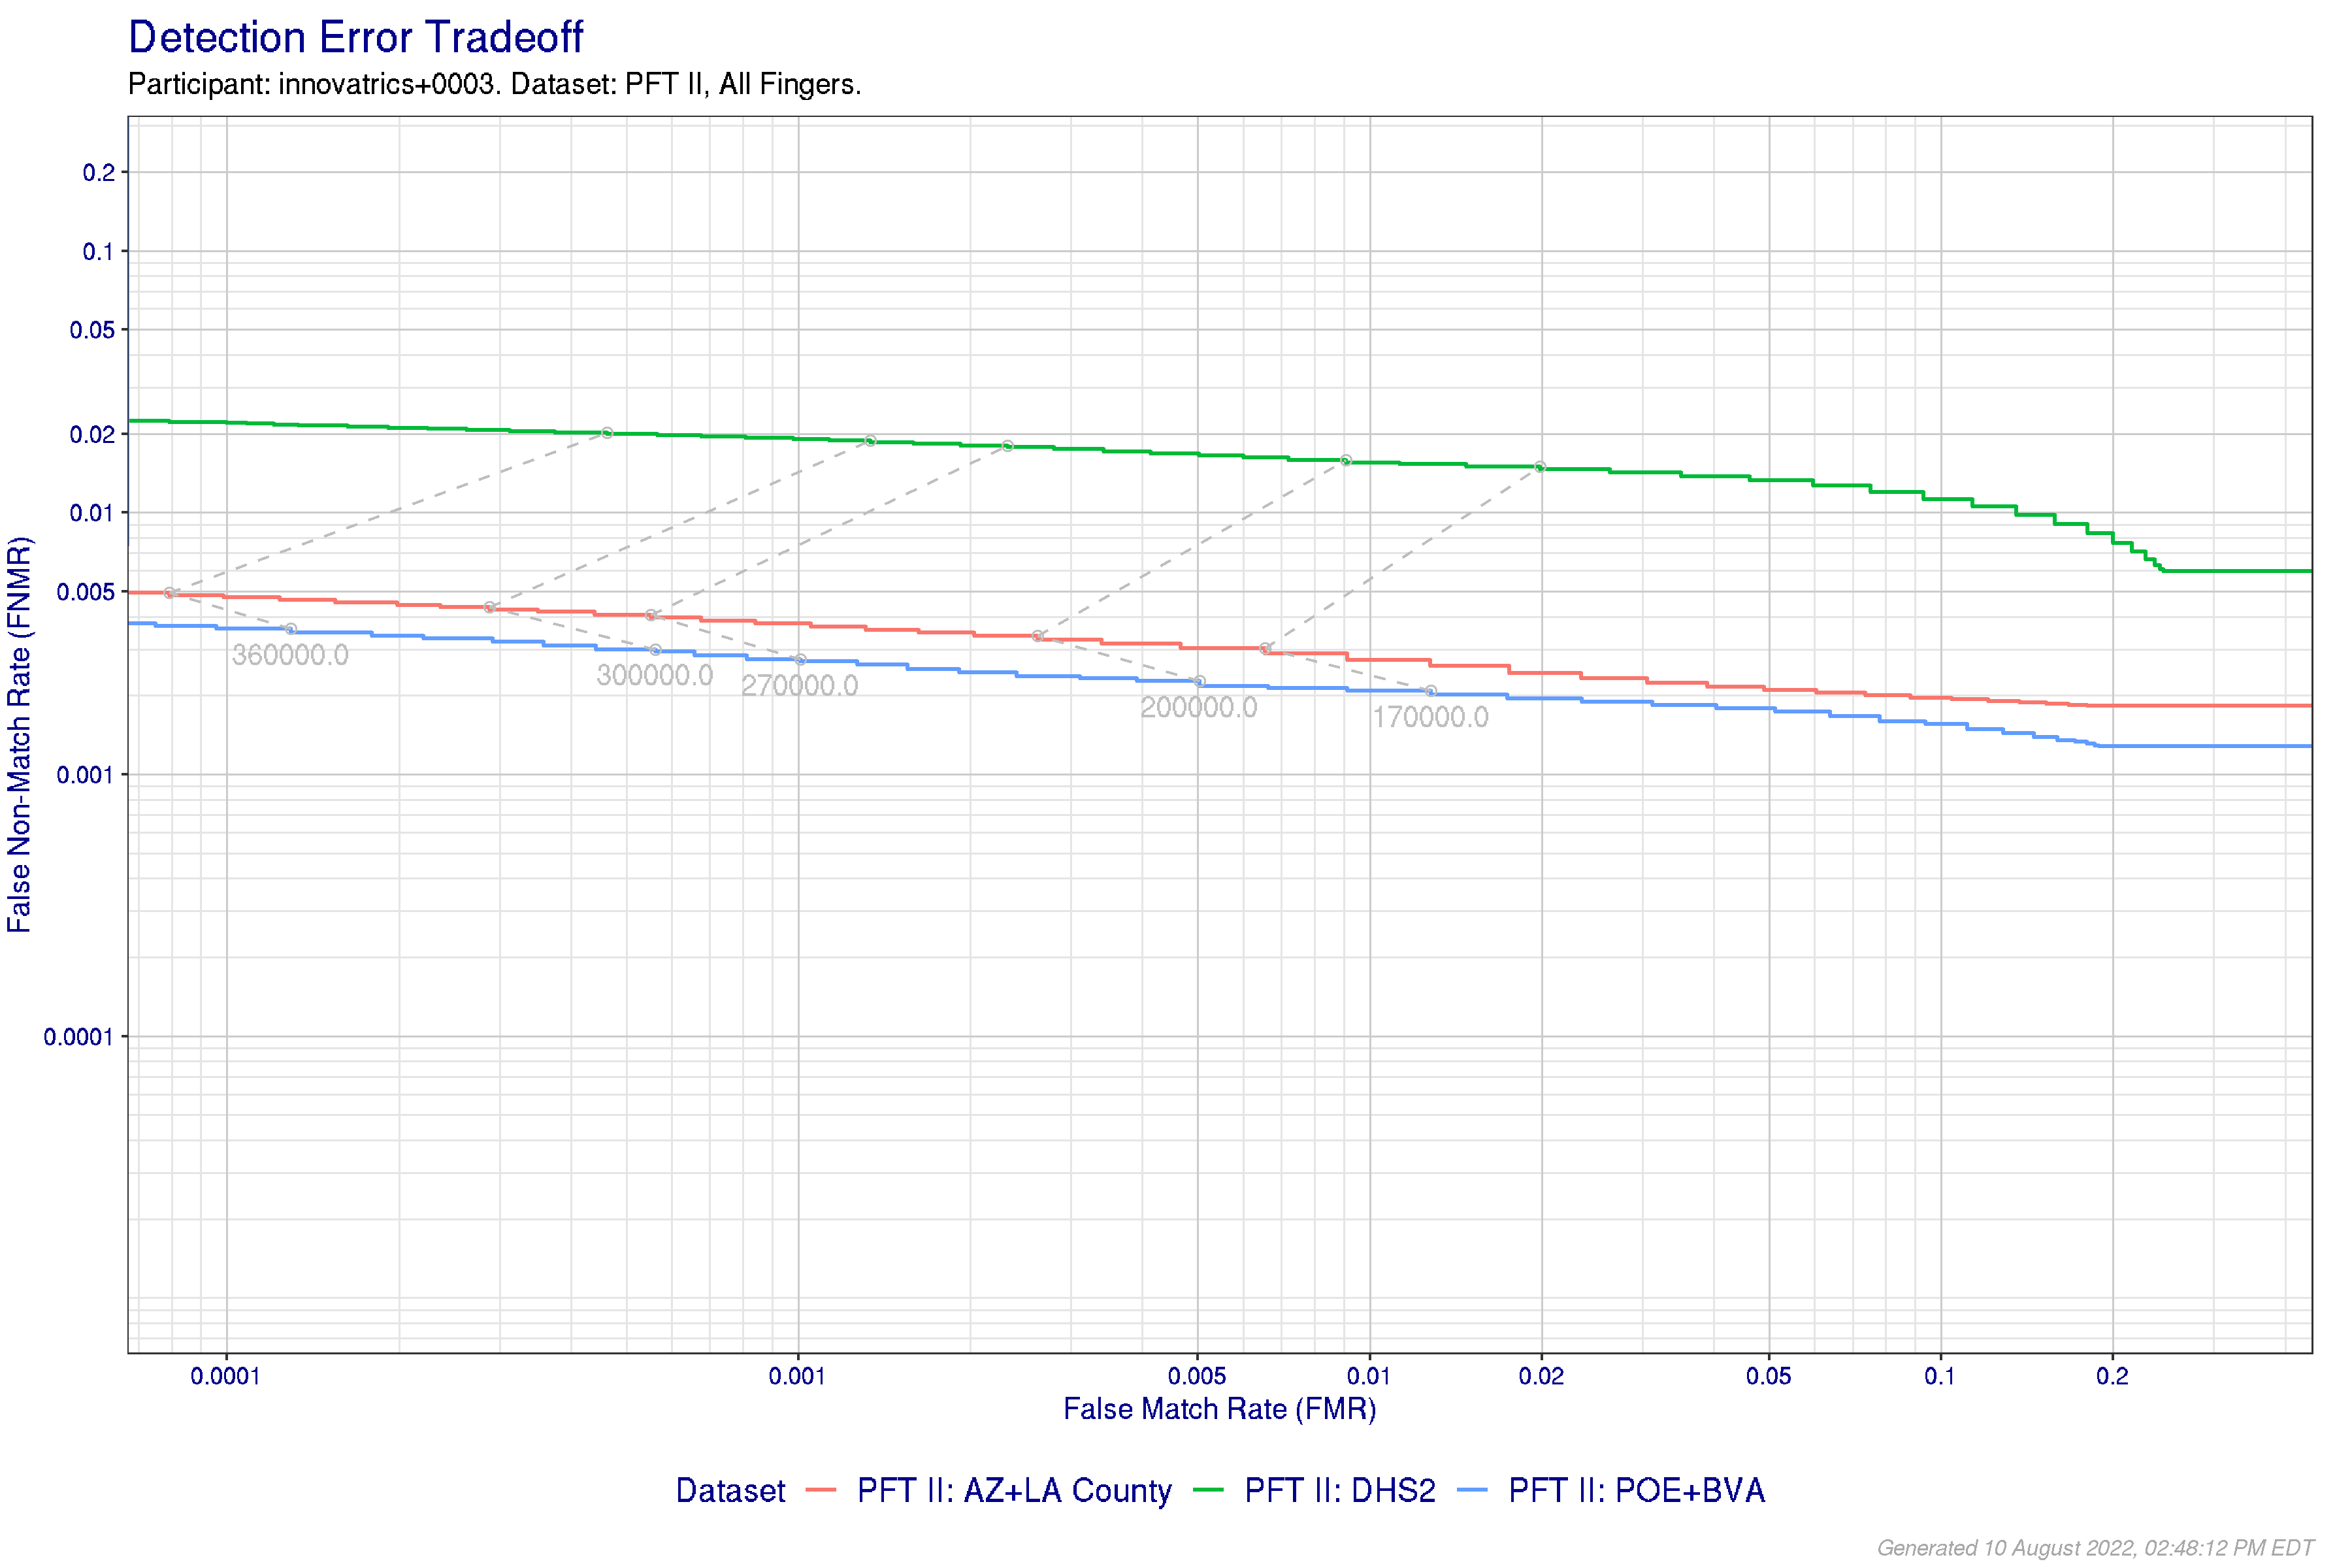 Detection error tradeoff of all comparisons from all fingers in PFT II, separated by dataset. Curves are linked at equivalent score thresholds.